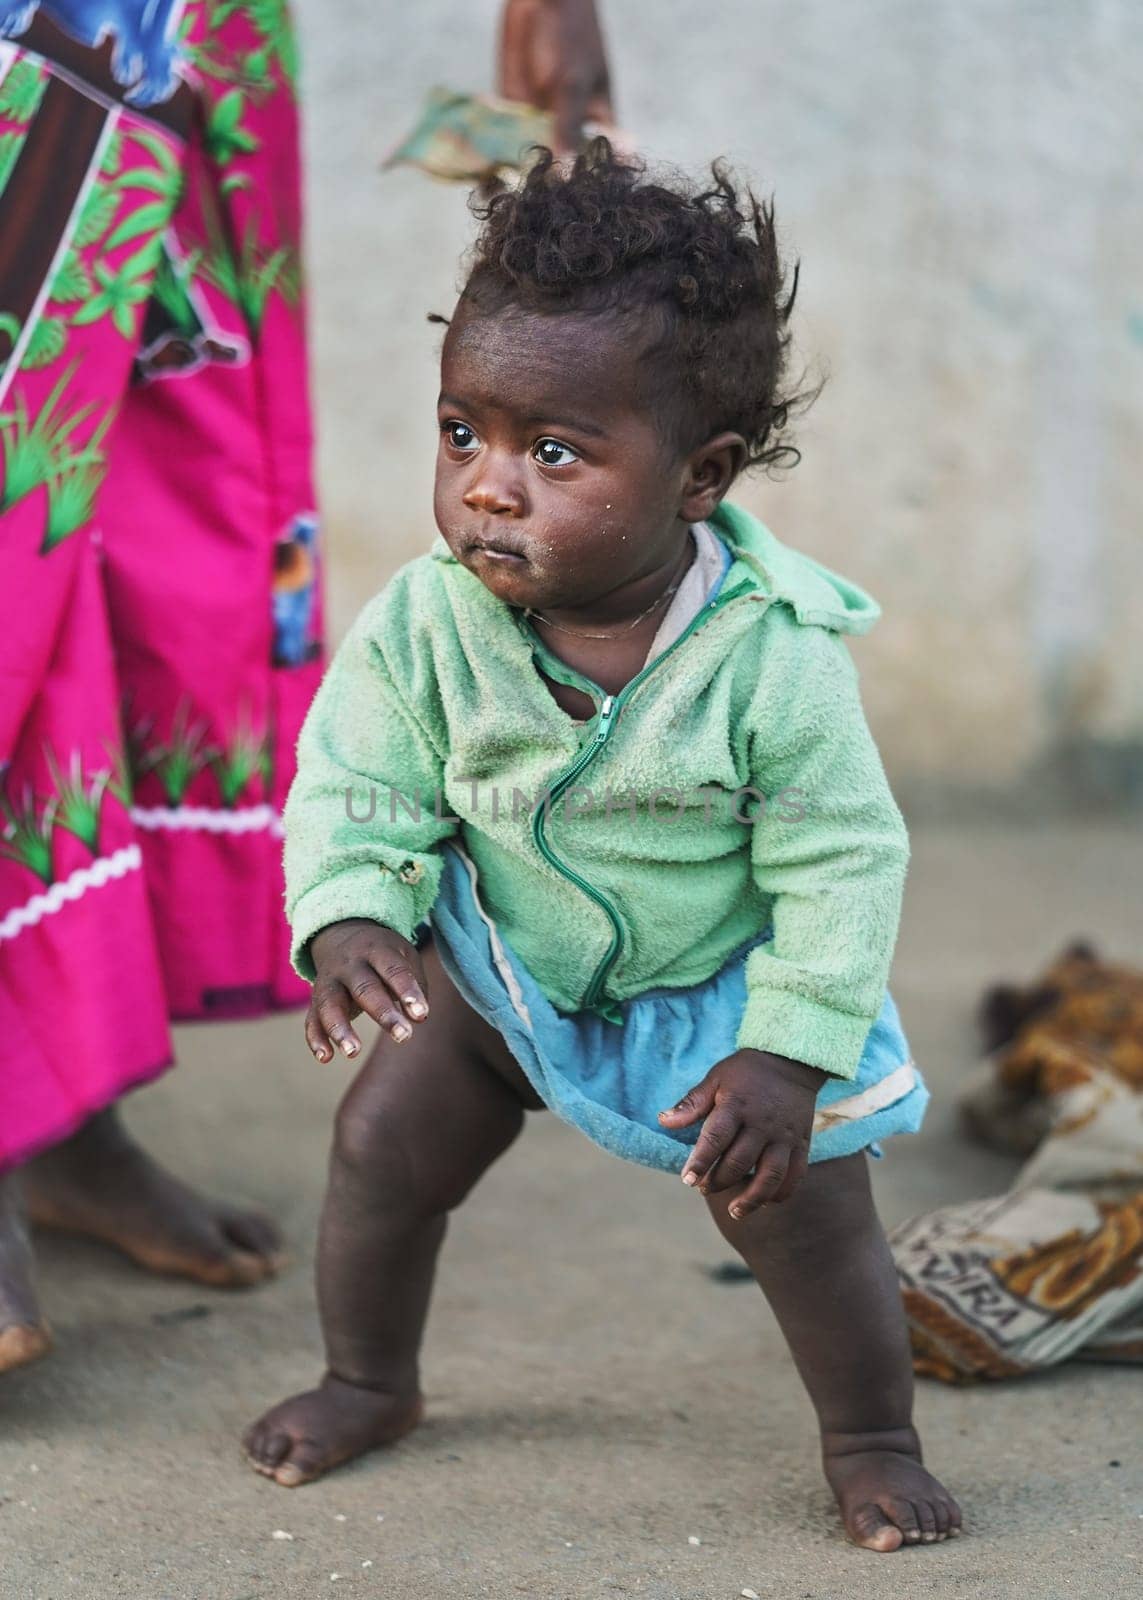 Ranohira, Madagascar - April 29, 2019: Unknown little Malagasy kid, barefoot, barely standing, mother stands near. People in Madagascar are poor but cheerful especially children by Ivanko